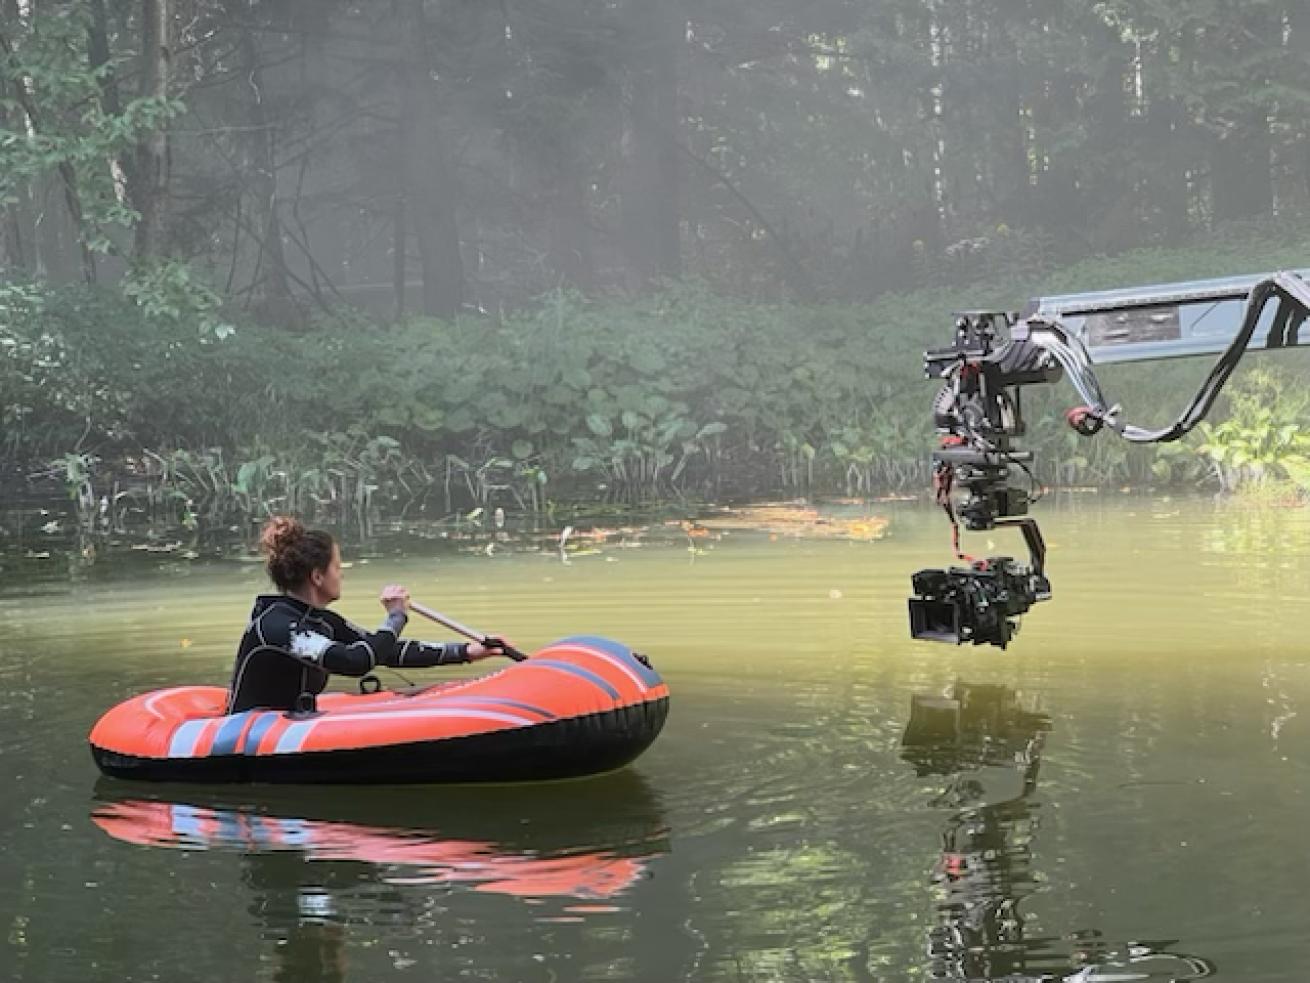 Water safety sometimes involves setting props or scenes in the water, seen here setting lily pads for an establishing shot on a Hallmark TV series, *The Way Home*. 